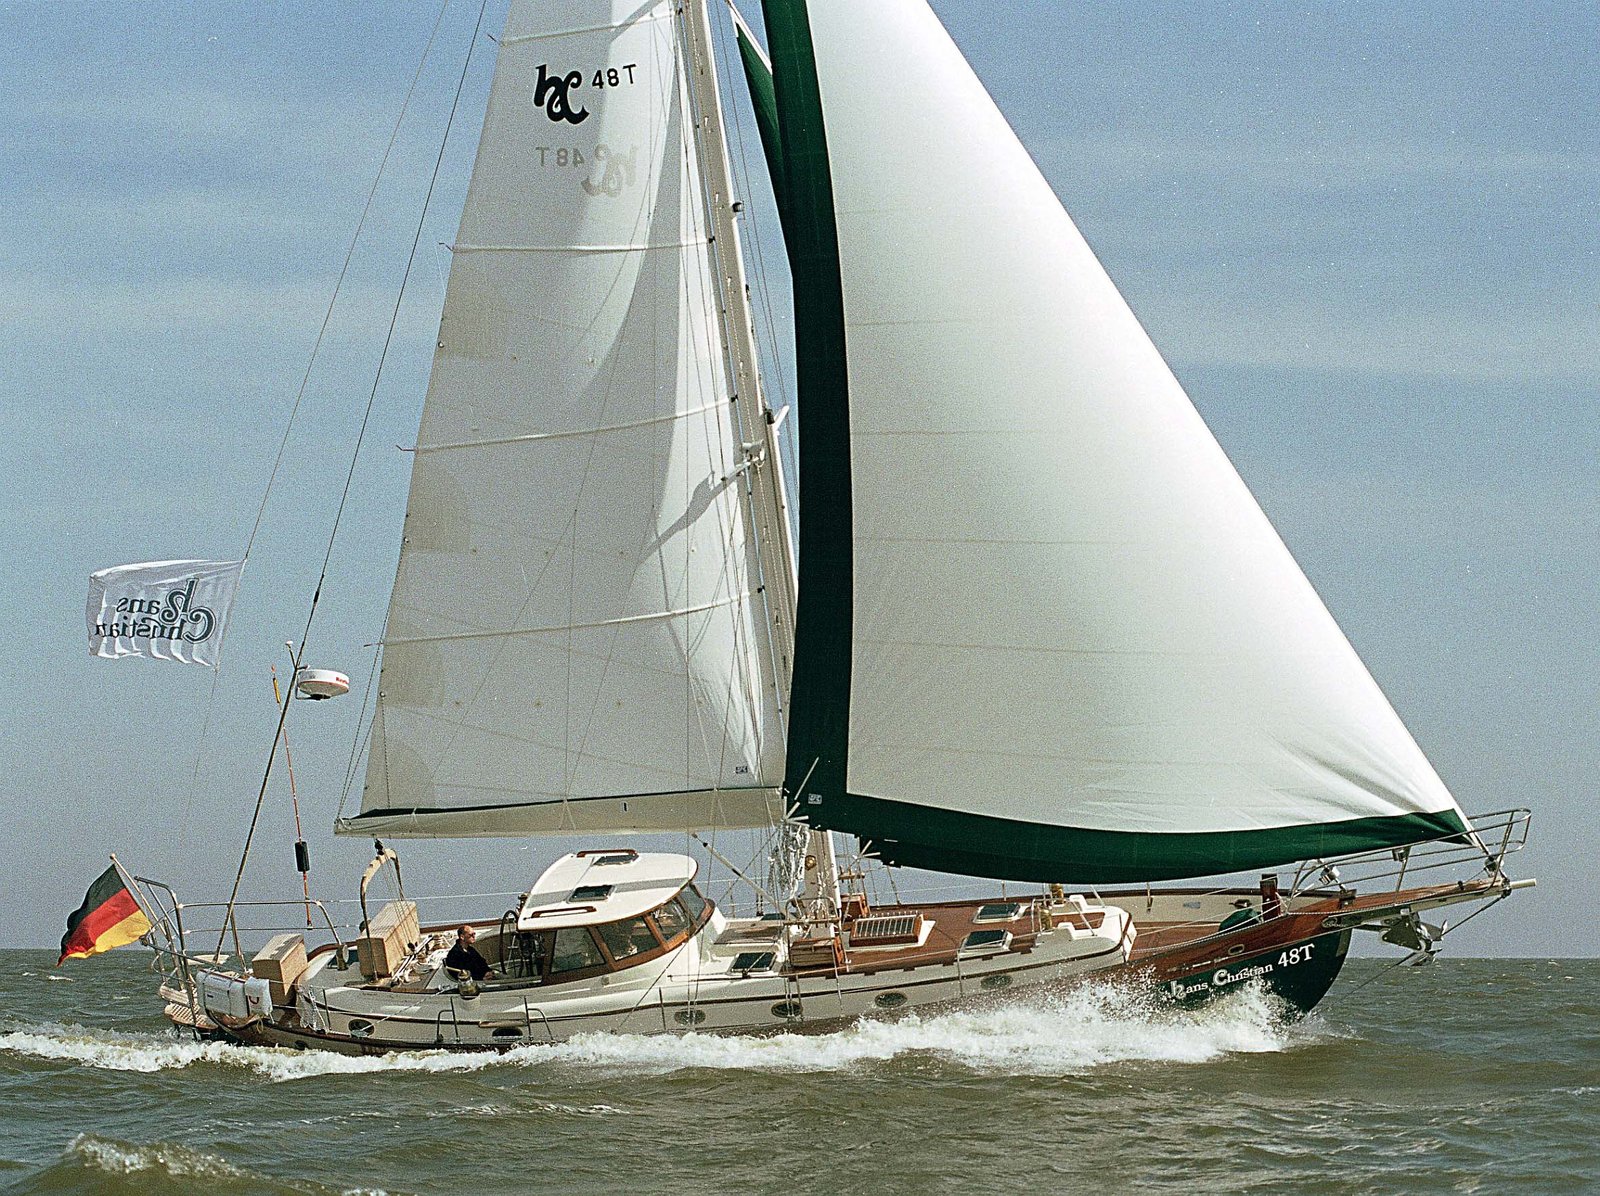 Hans Christian 48T – Boat #28 Sailing and Dusseldorf Boat Show 2001